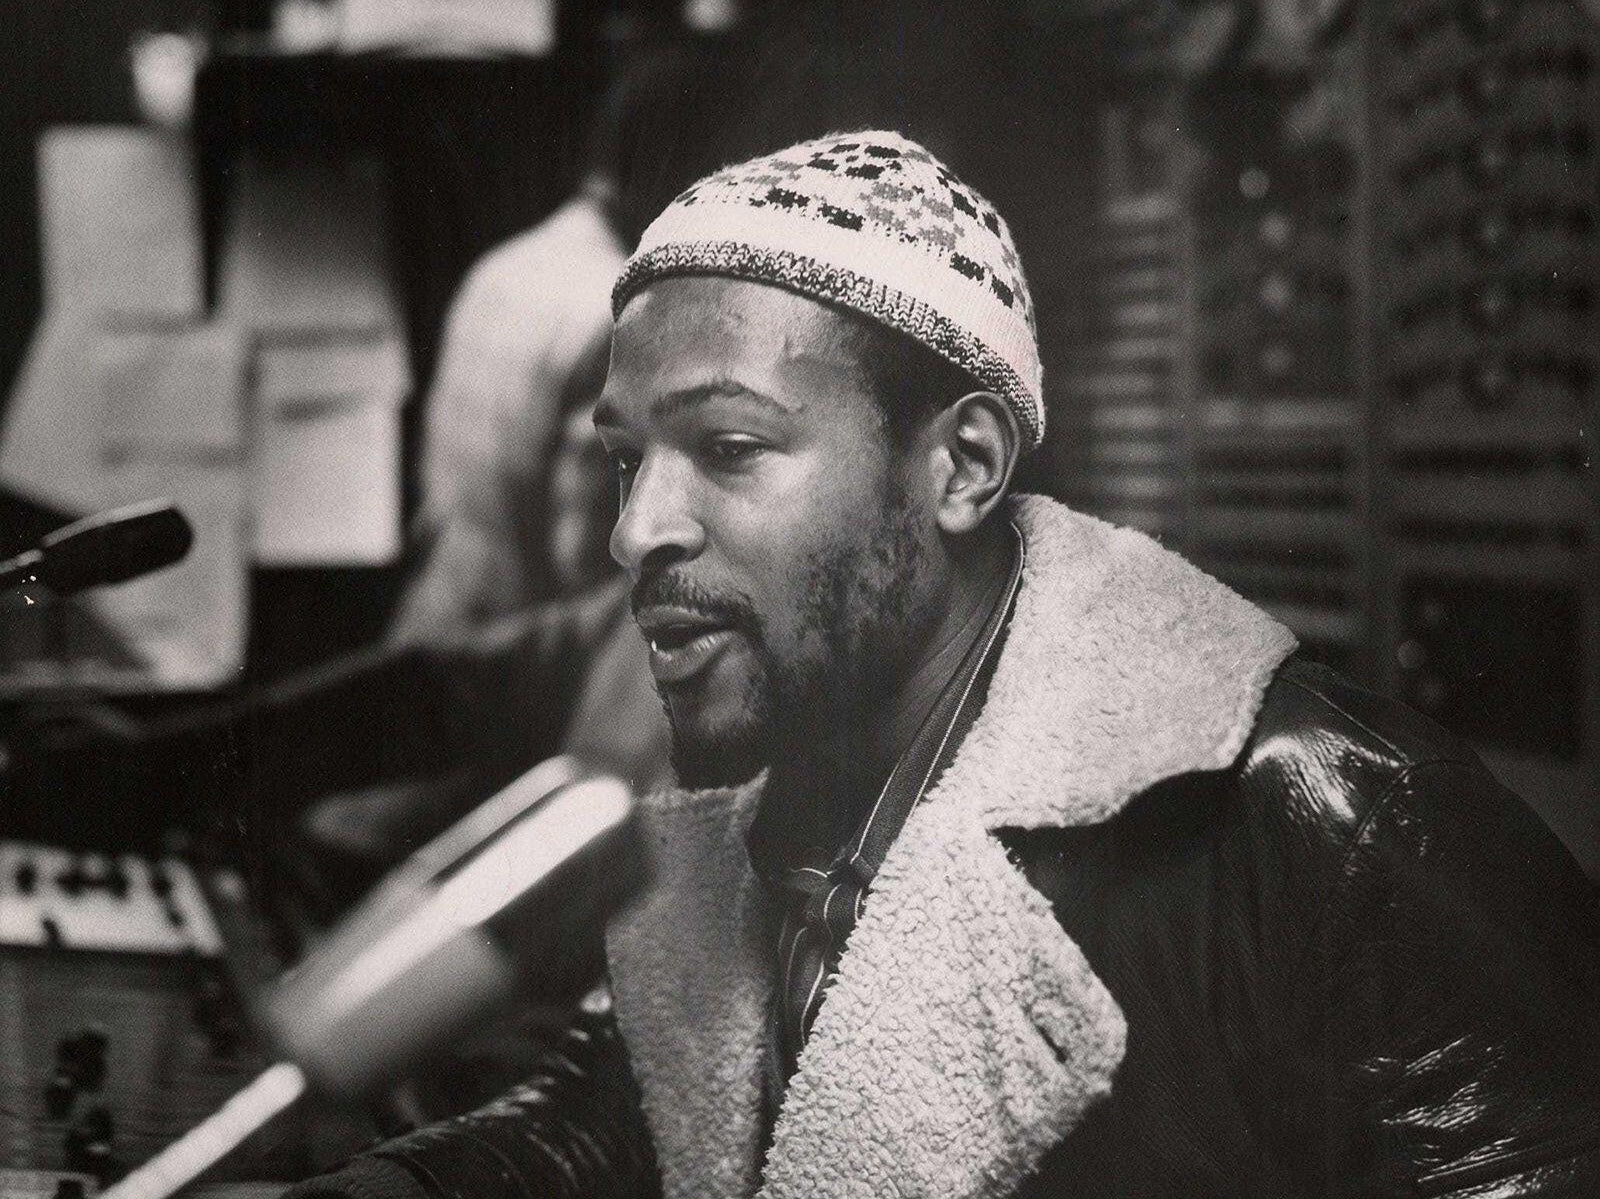 Marvin Gaye photographed by Gordon Staples, concertmaster of the Detroit Symphony Orchestra, in the Motown studio console room in early 1971